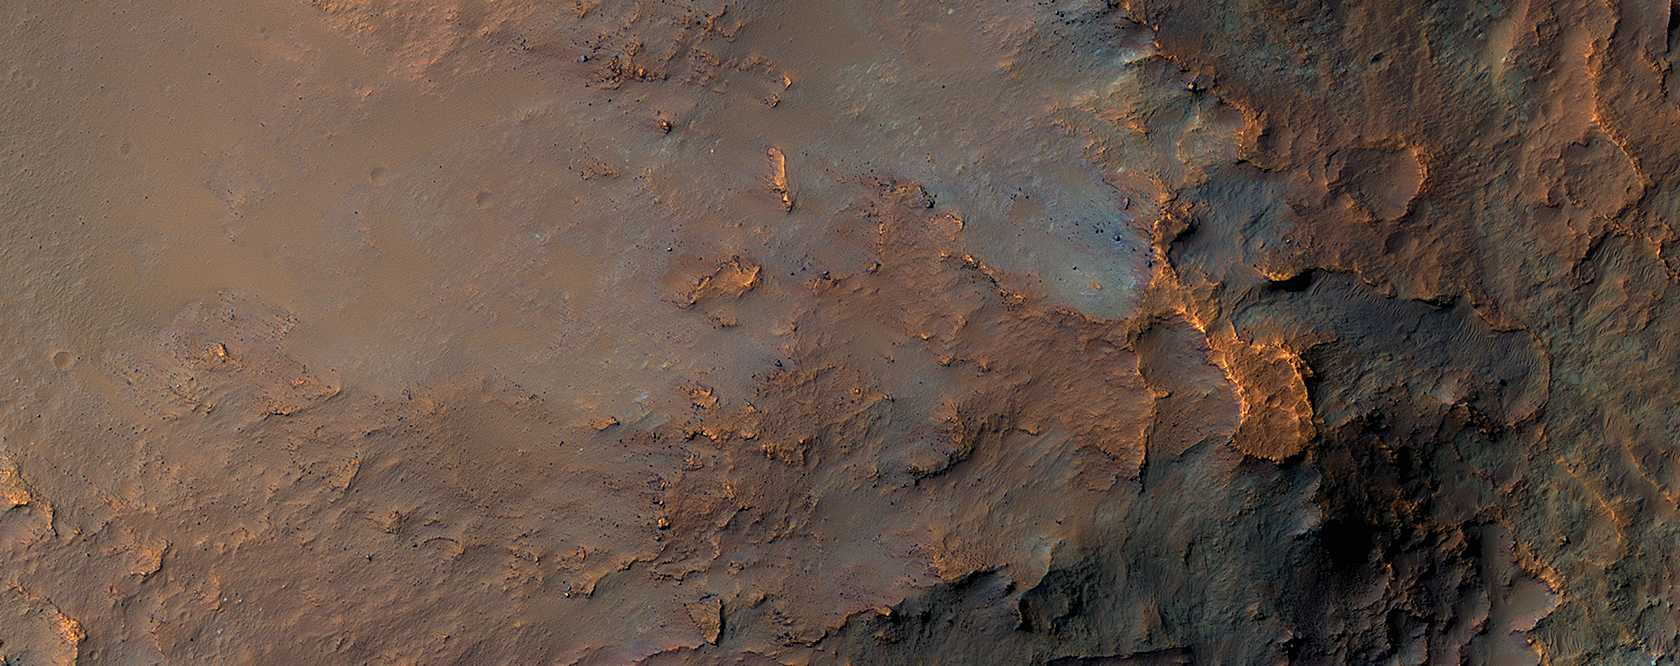 A Colorful Landslide in Eos Chasma